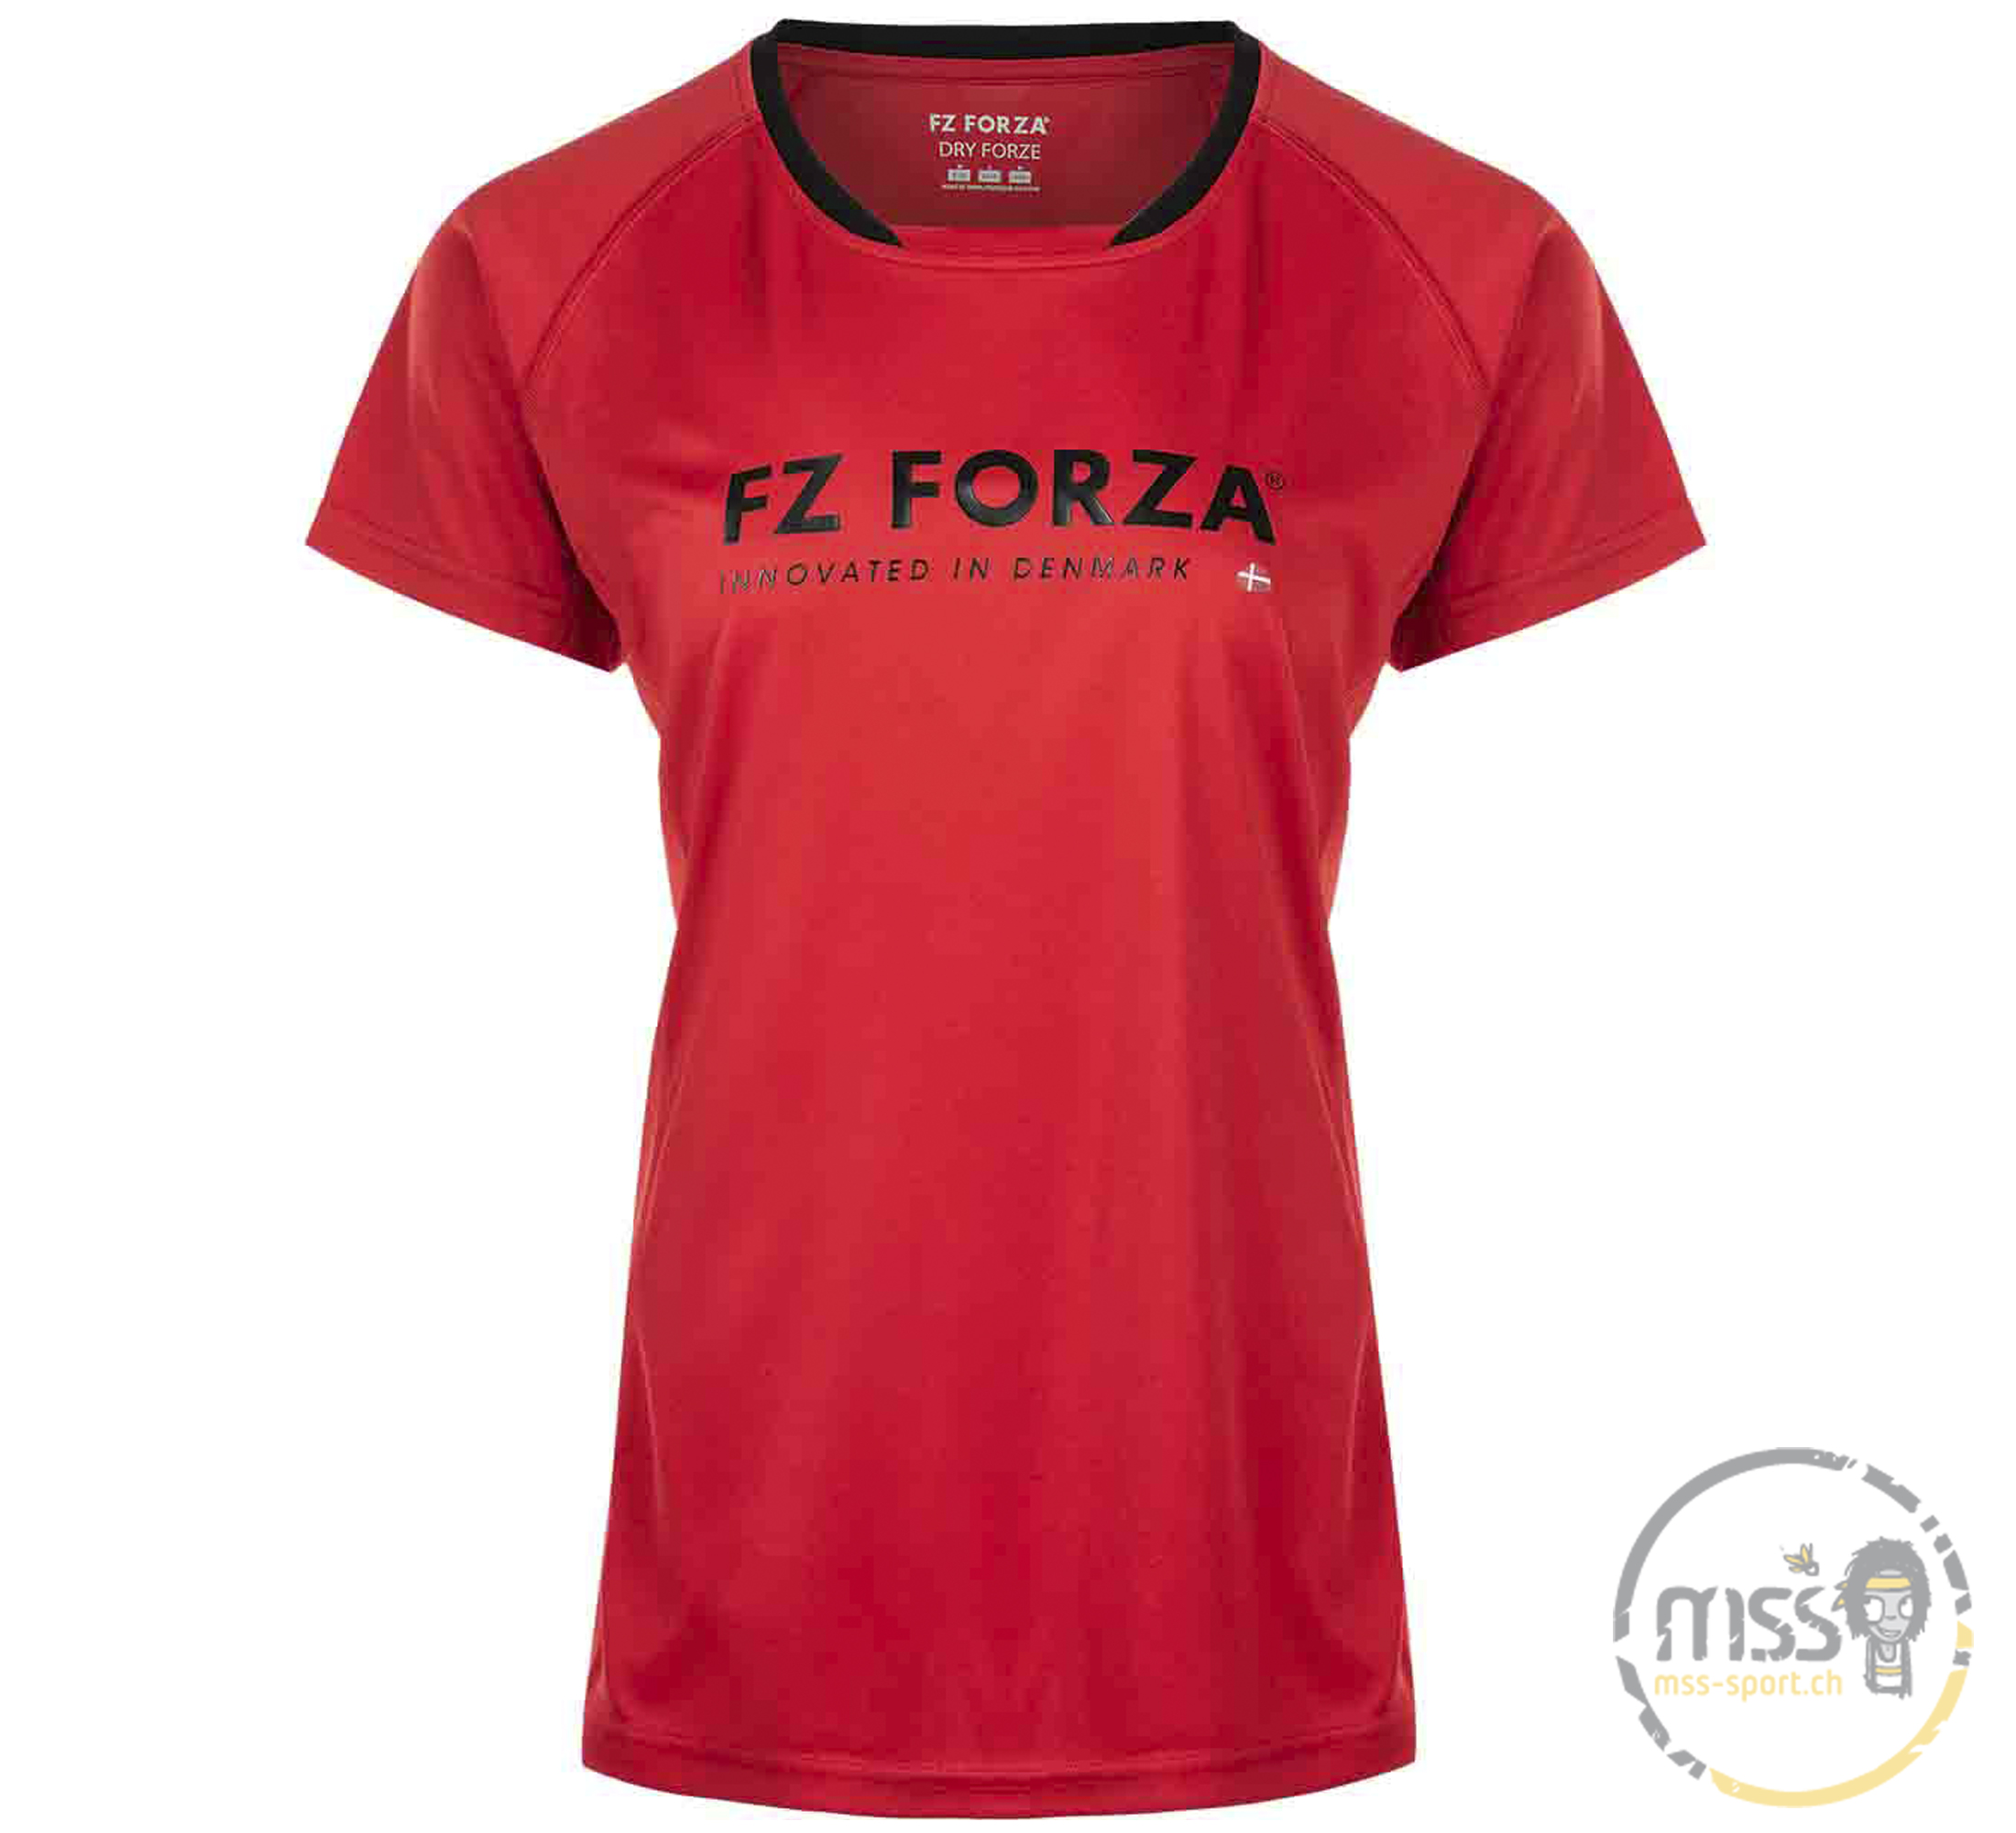 Forza Shirt Blingley Tee chinese red Lady